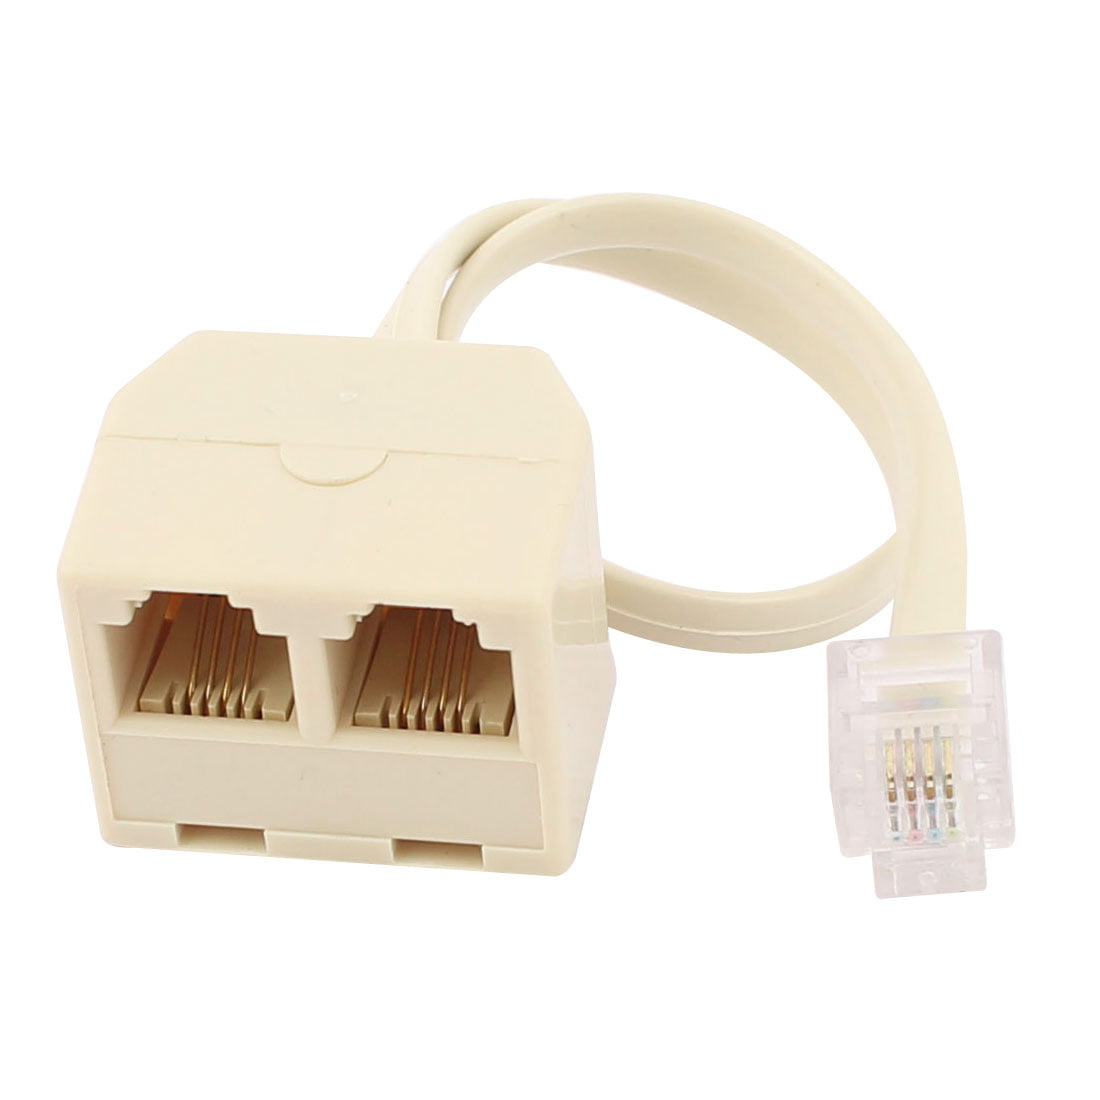 RJ11 6P4C Male to 5 Way 6P4C Female Socket RFAdapter Used for Connect Printer Phone Line Splitter Adapter 1 to 5 Fax Machine and Multiple Landline Telephones